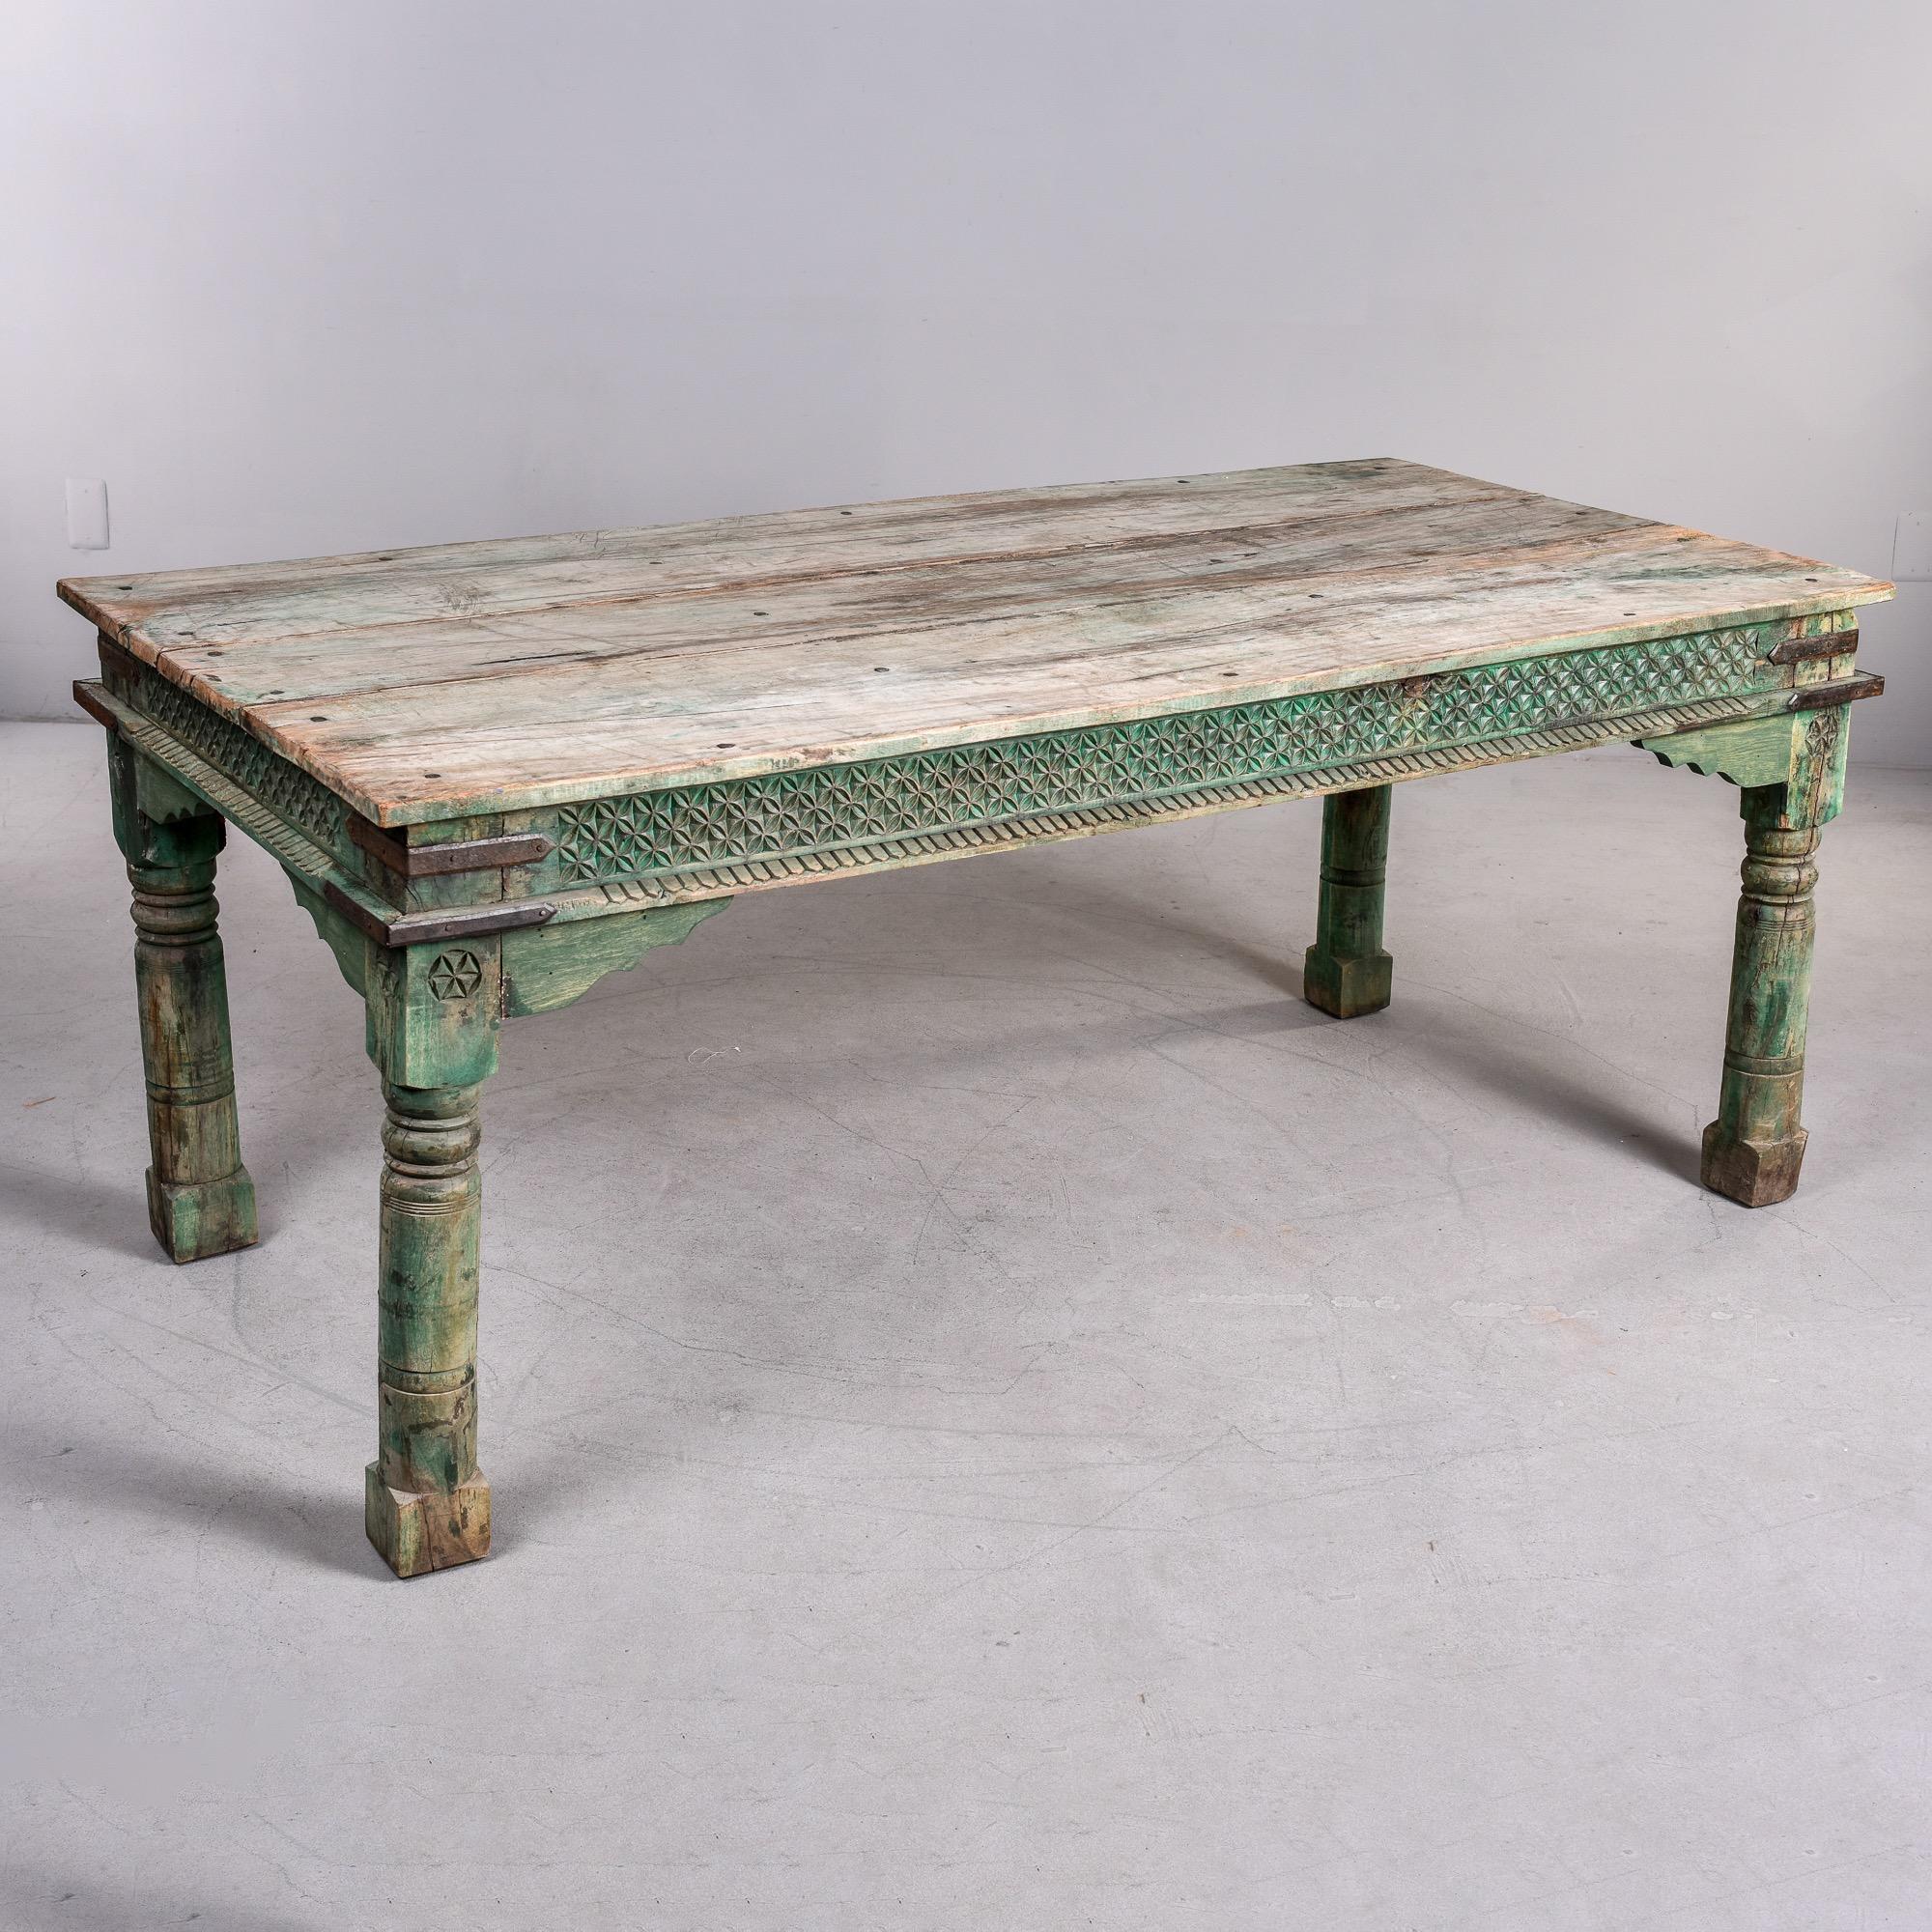 Found in the United States, this early 20th century painted and carved dining table appears to be of Indian origin dating from the 1930s or so. Farm style rustic table has original faded and worn green paint, substantial turned legs with block feet